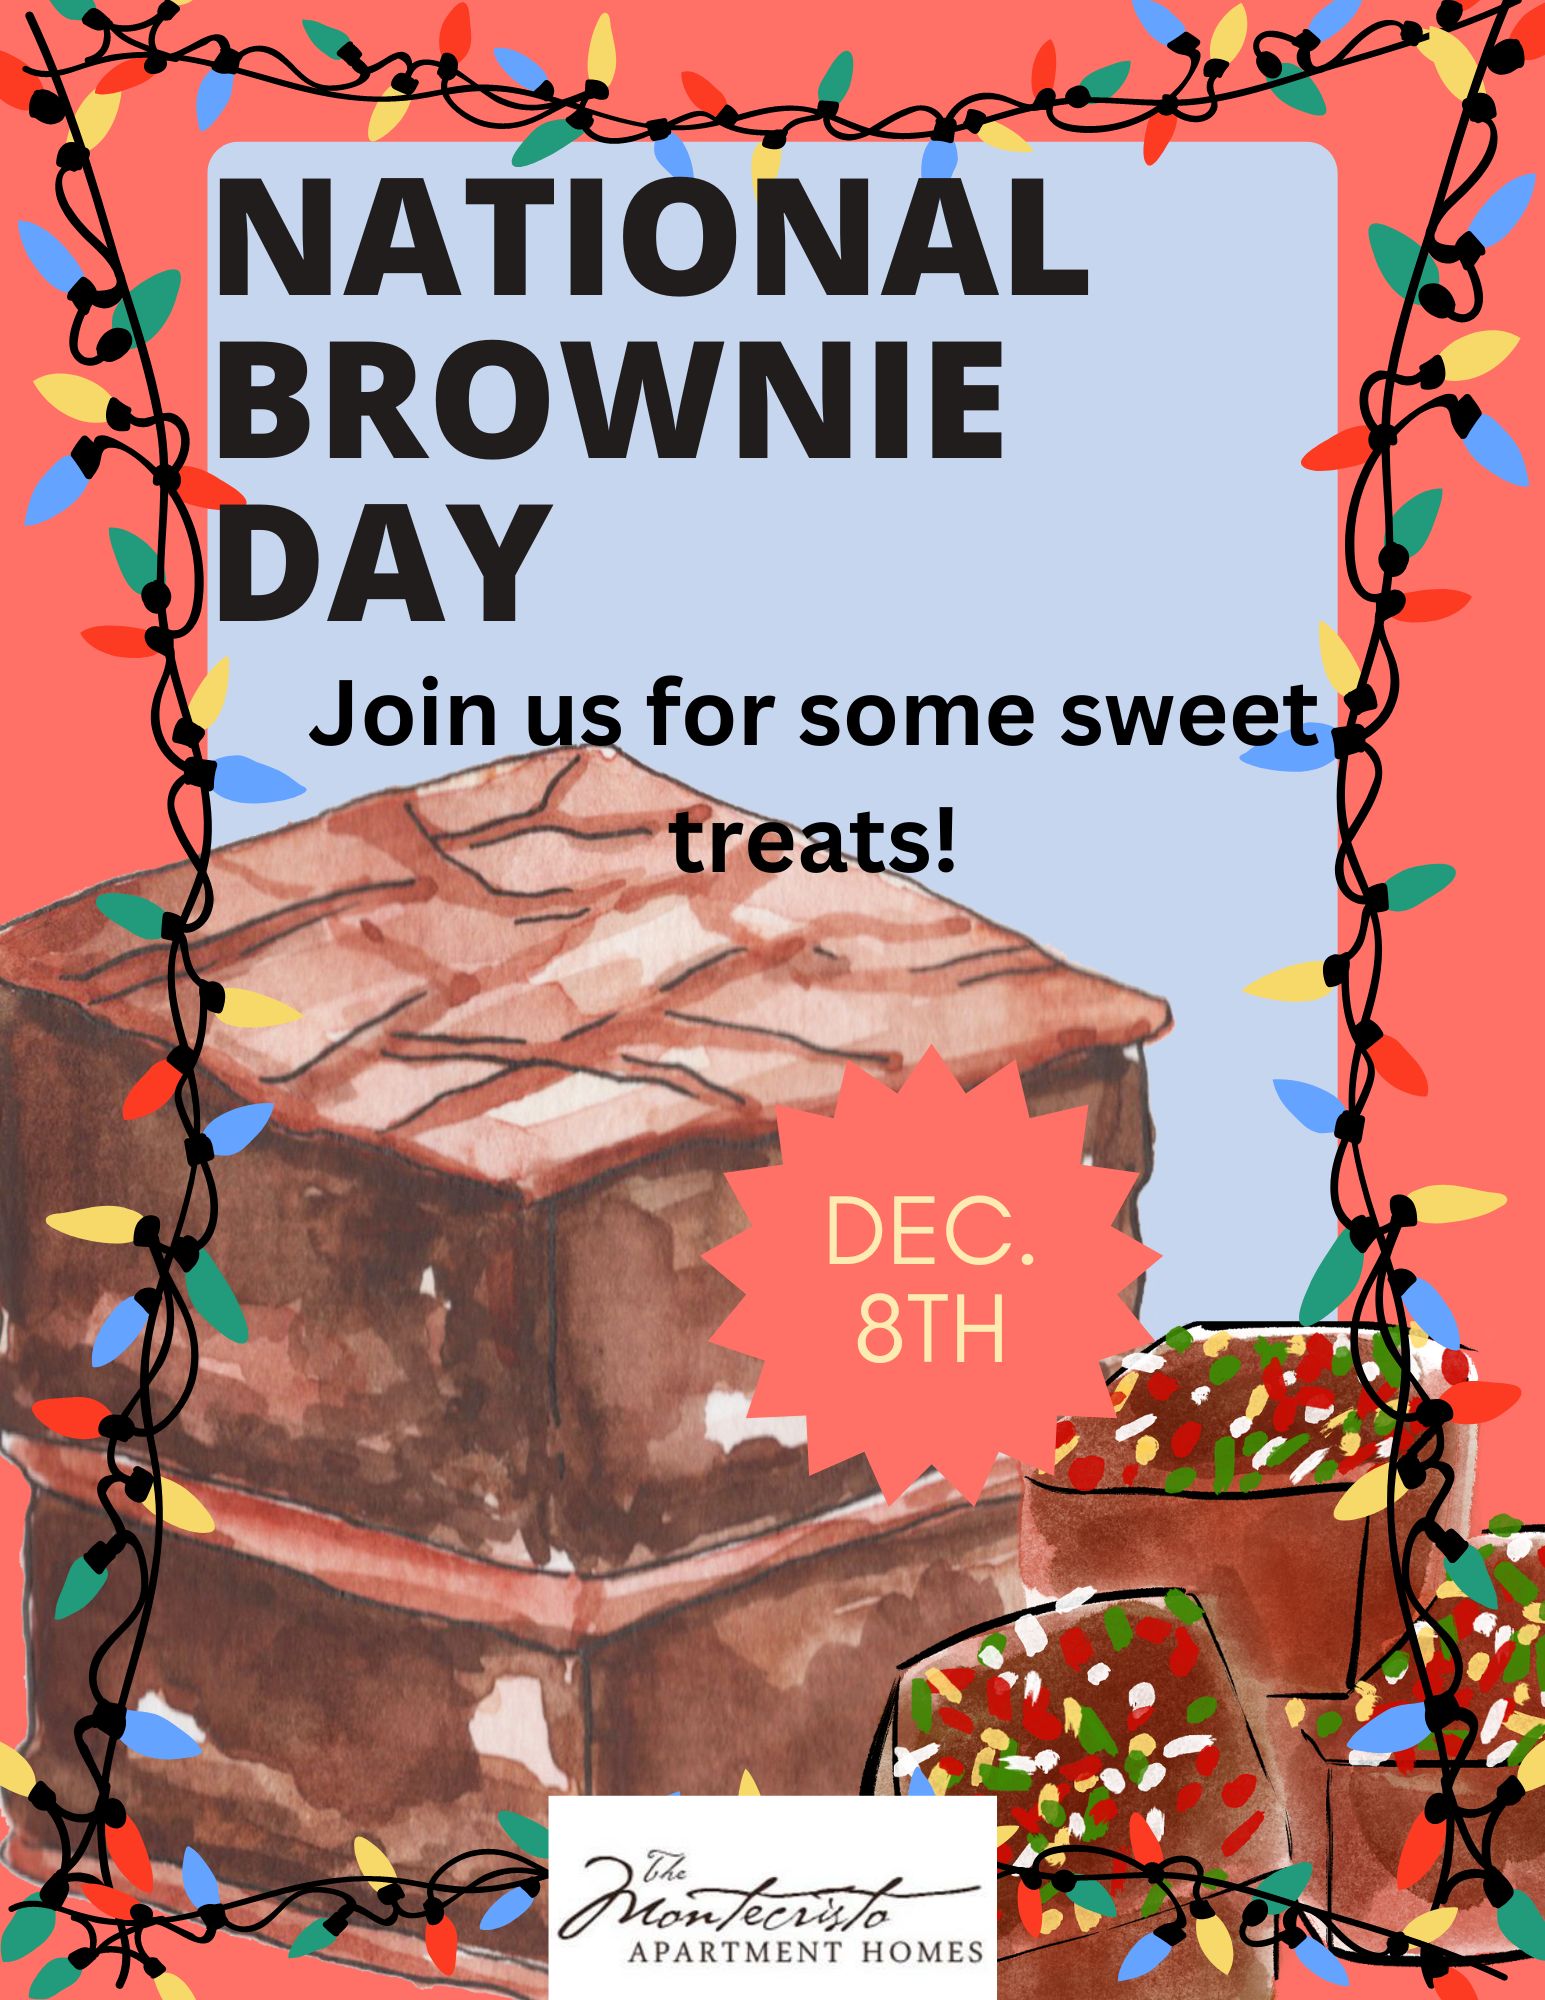 A flyer for national brownie day in San Antonio.